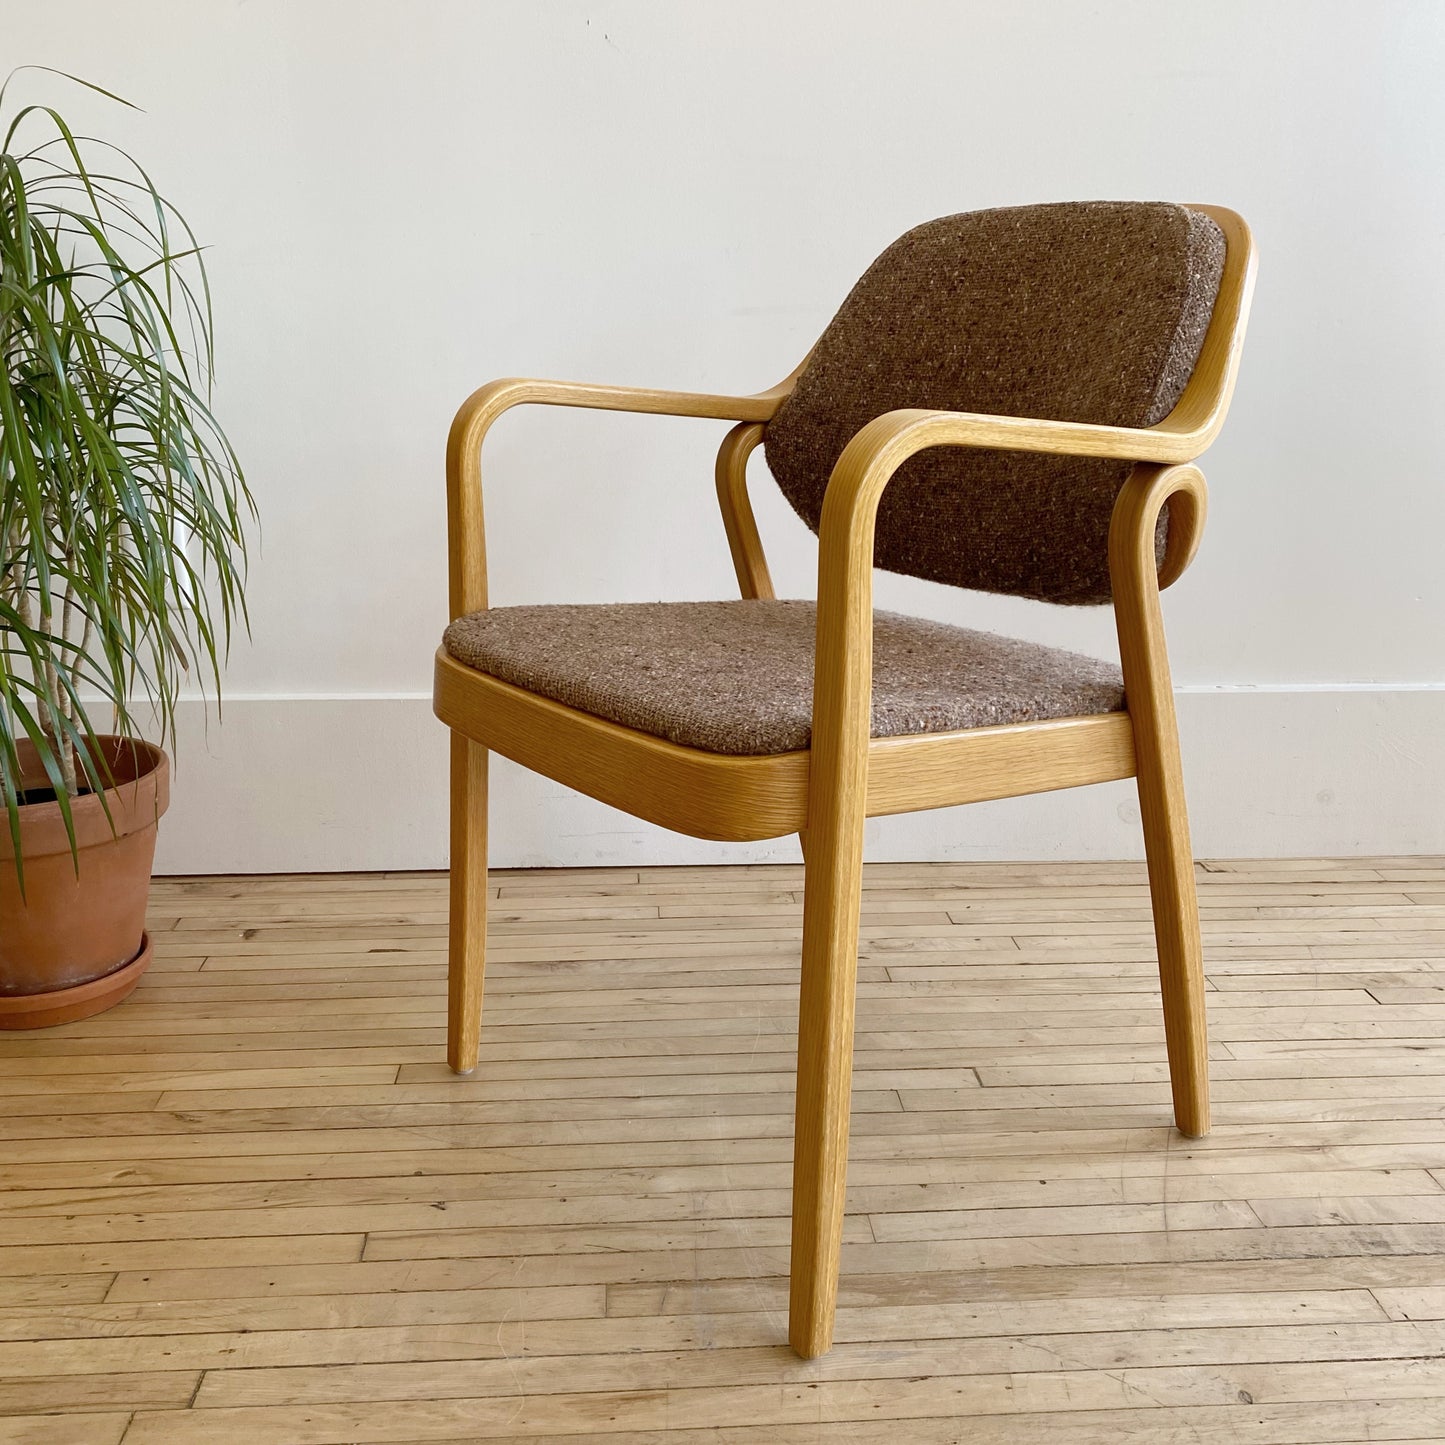 Vintage Bentwood Armchair, Don Pettit for Knoll (Single)